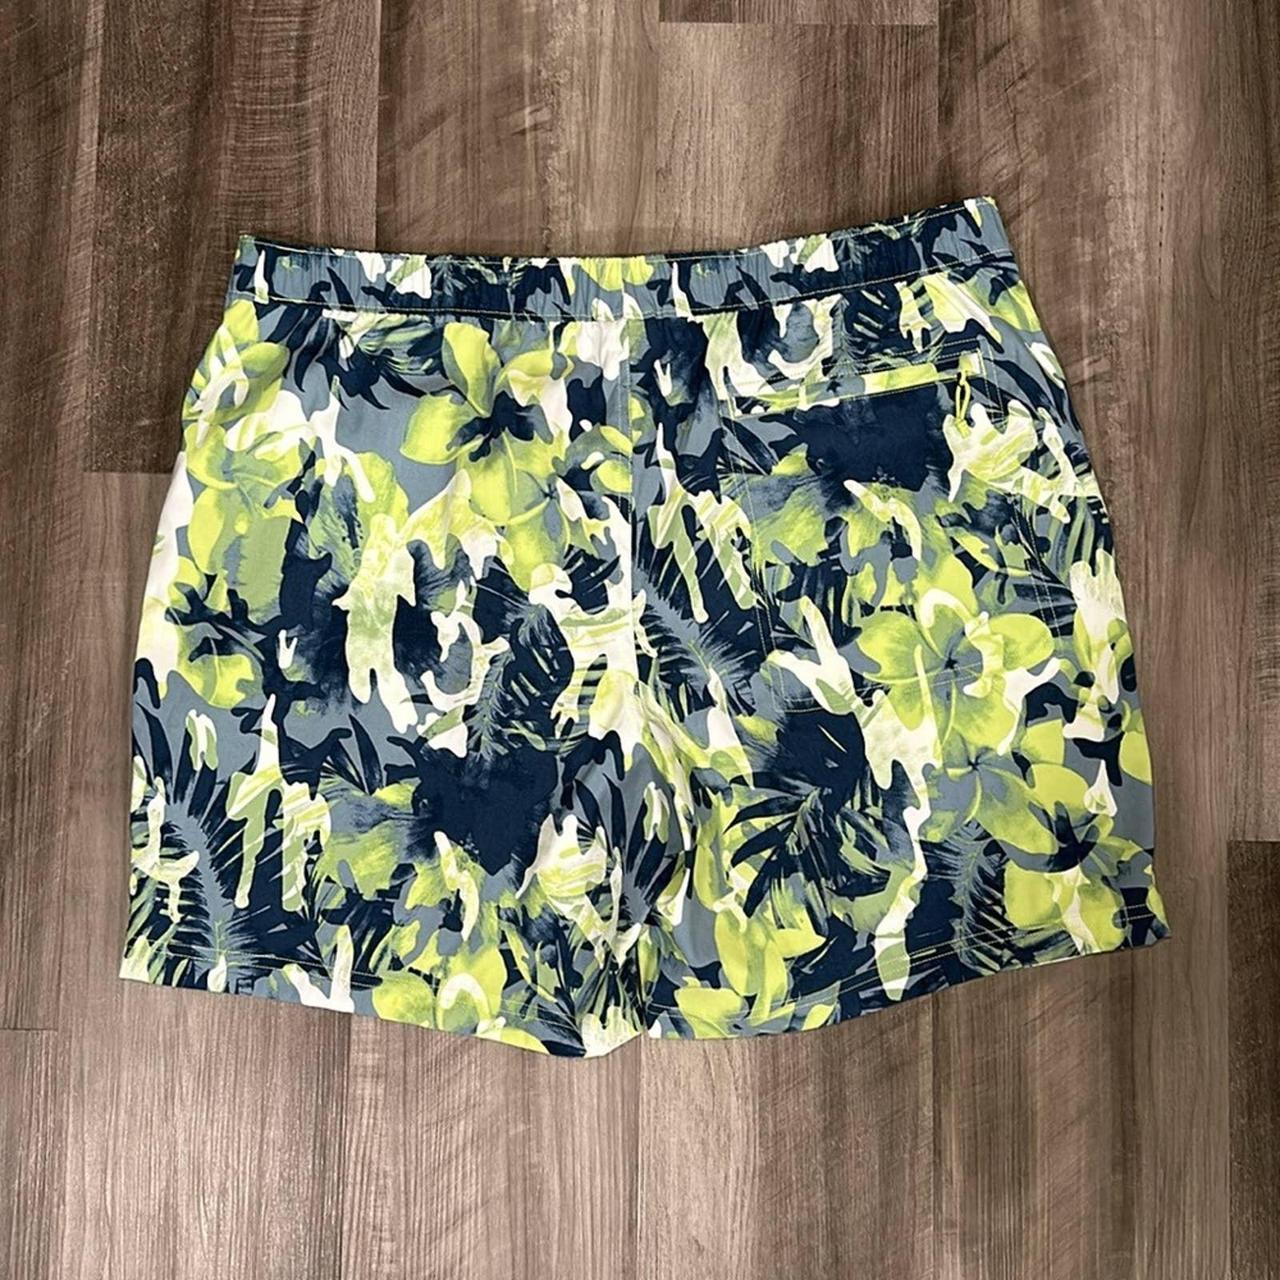 The North Face Flash Dry Relaxed Fit Shorts Item is - Depop